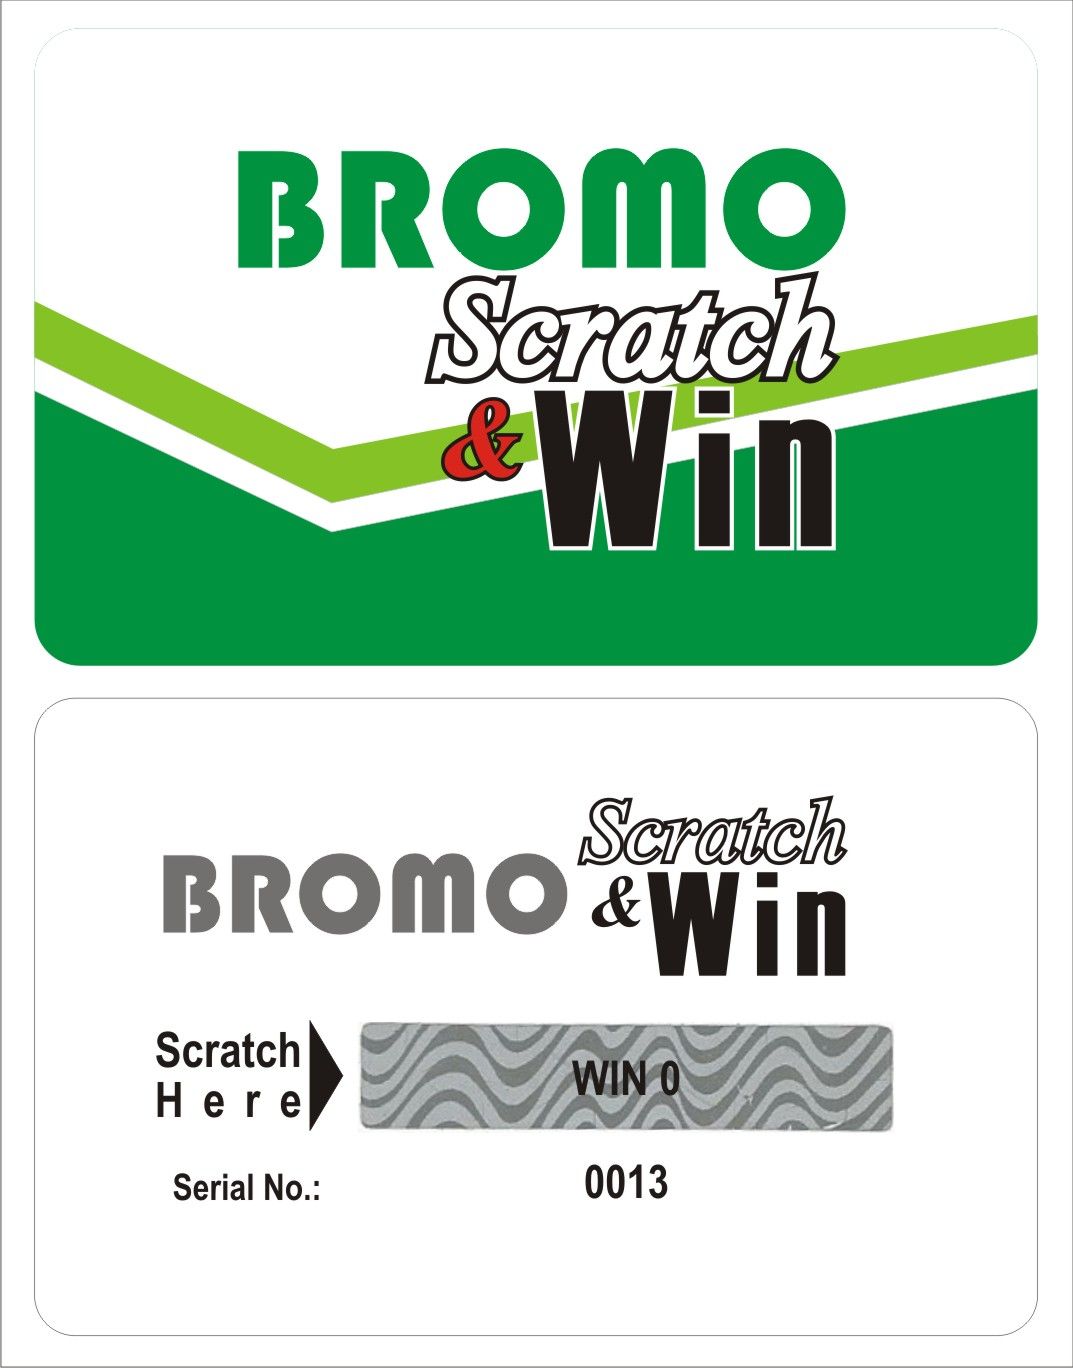 CALL EMMANUEL ON 08176499649 TO PRINT PROMO SCRATCH AND WIN CARDS, GIFT CARDS, VOUCHER, LOTTERY CARDS ETC